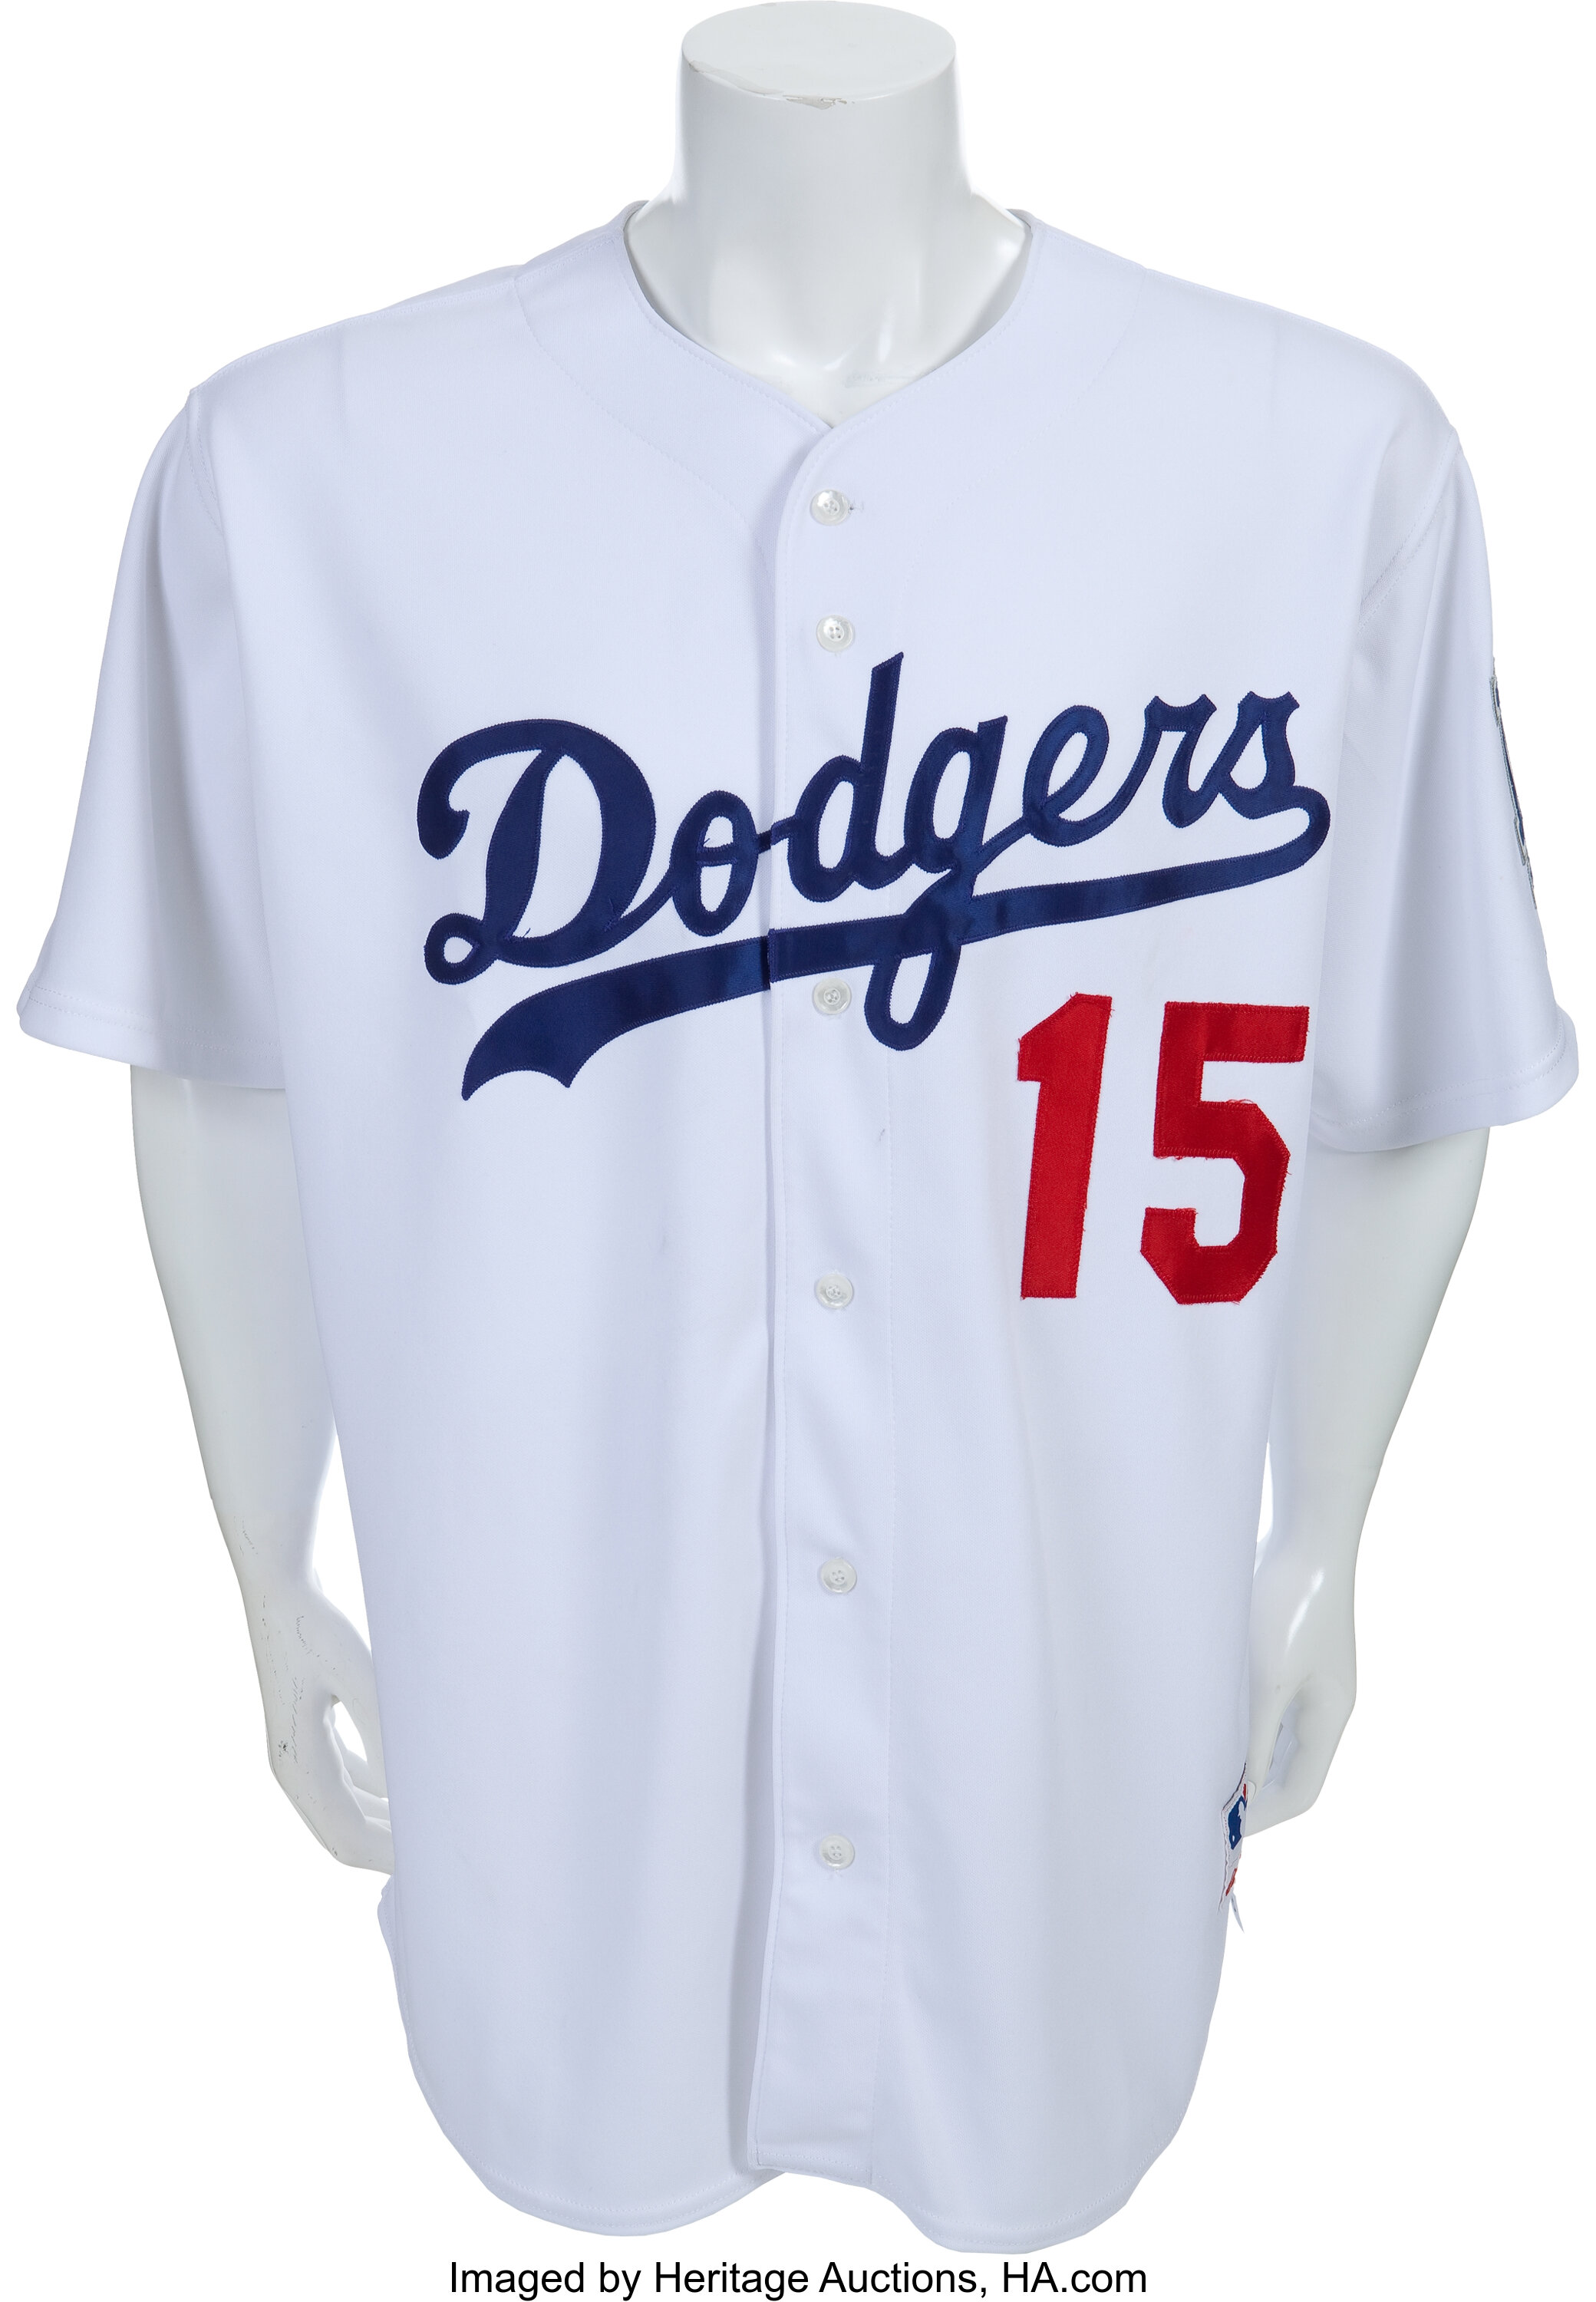 2001 Shawn Green Game Worn Los Angeles Dodgers Jersey with